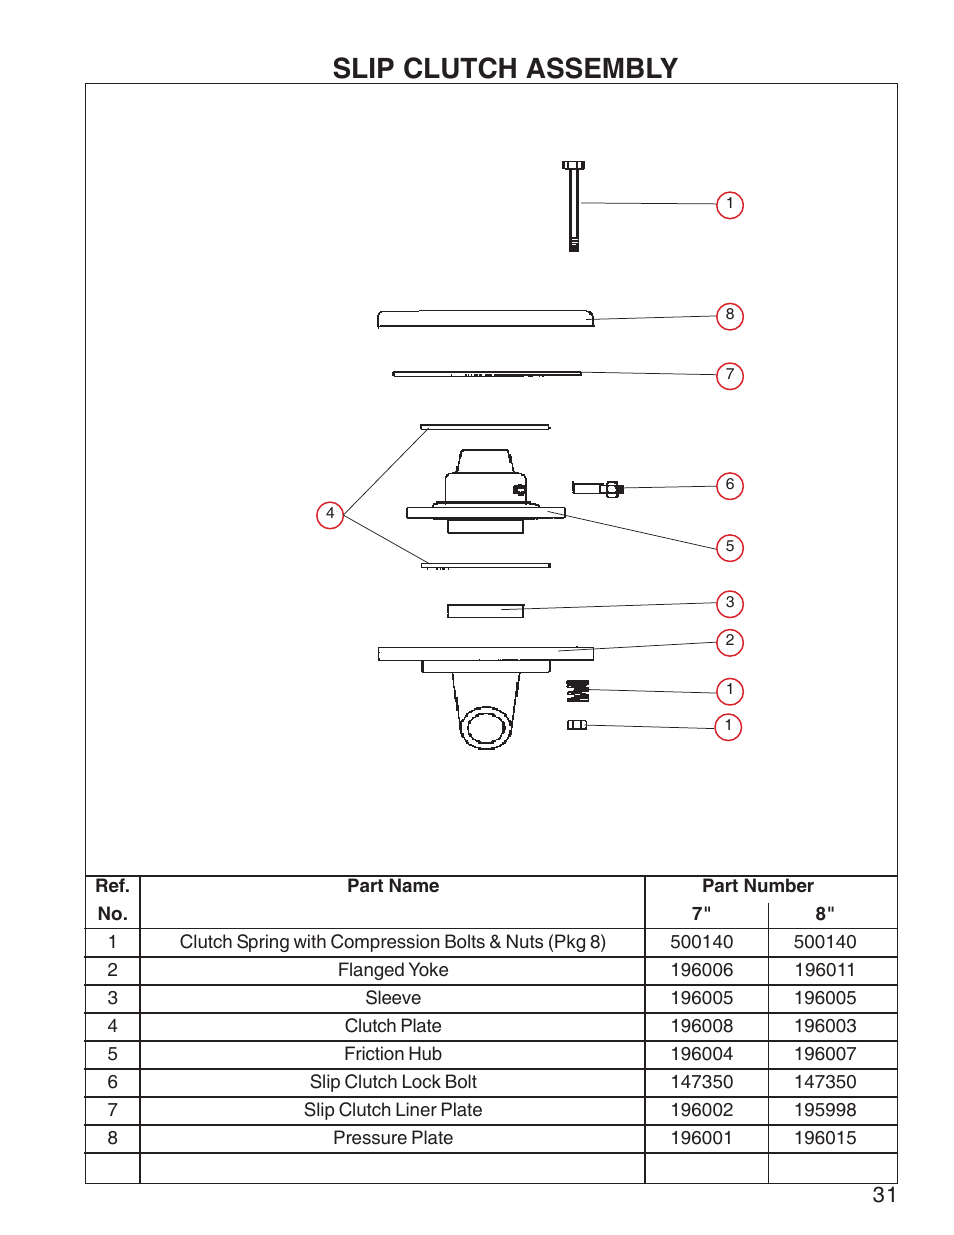 Slip clutch assembly | King Kutter Rotary Mower User Manual | Page 31 / 46